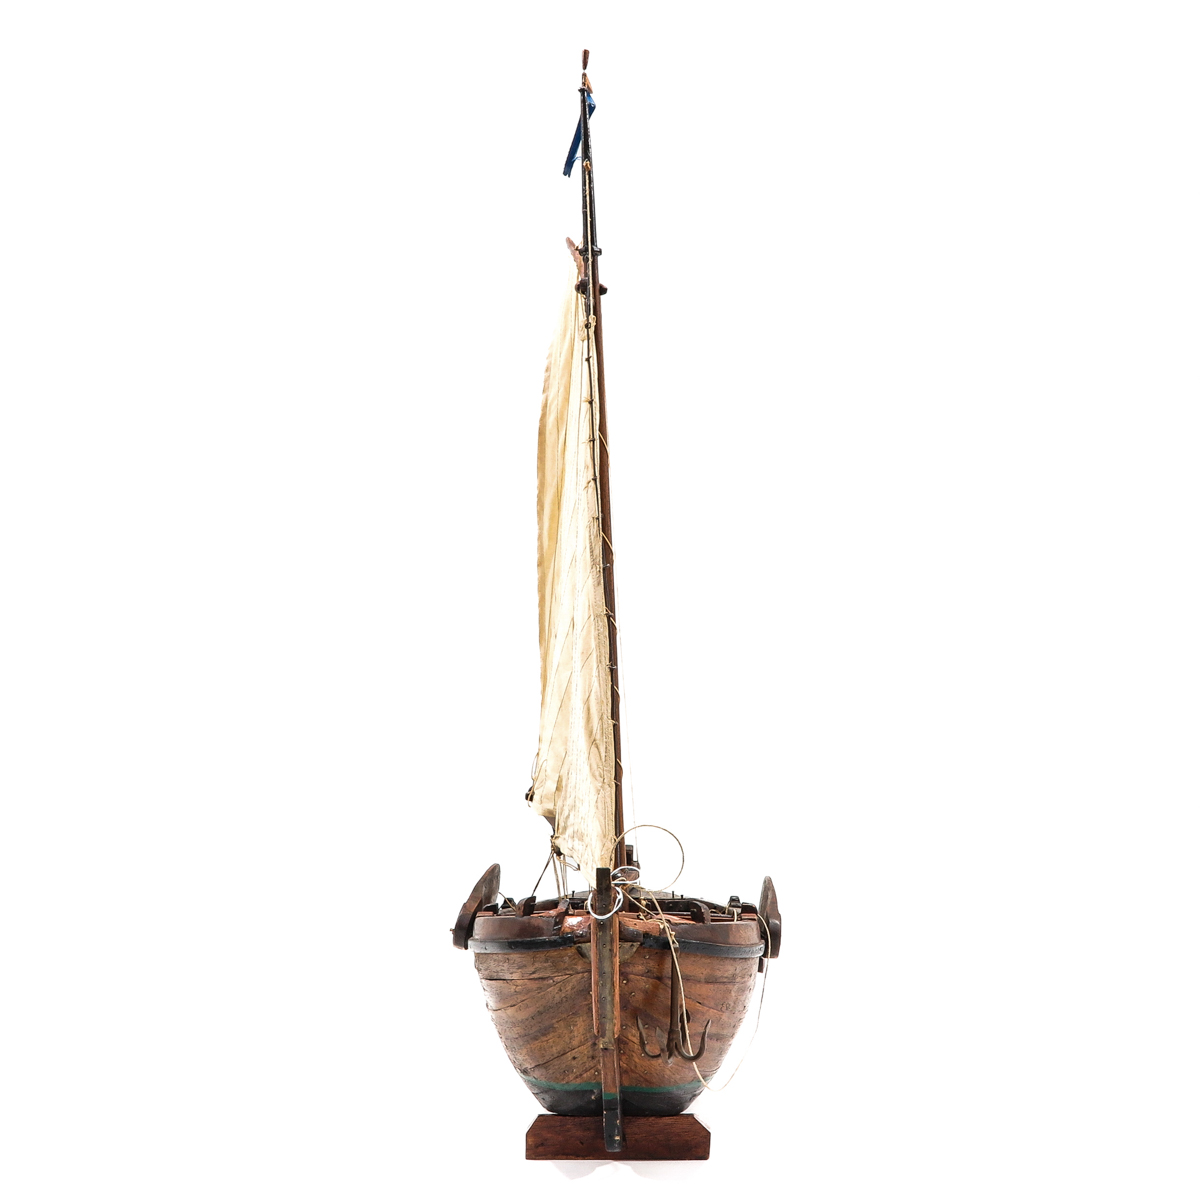 A Model Ship - Image 4 of 10